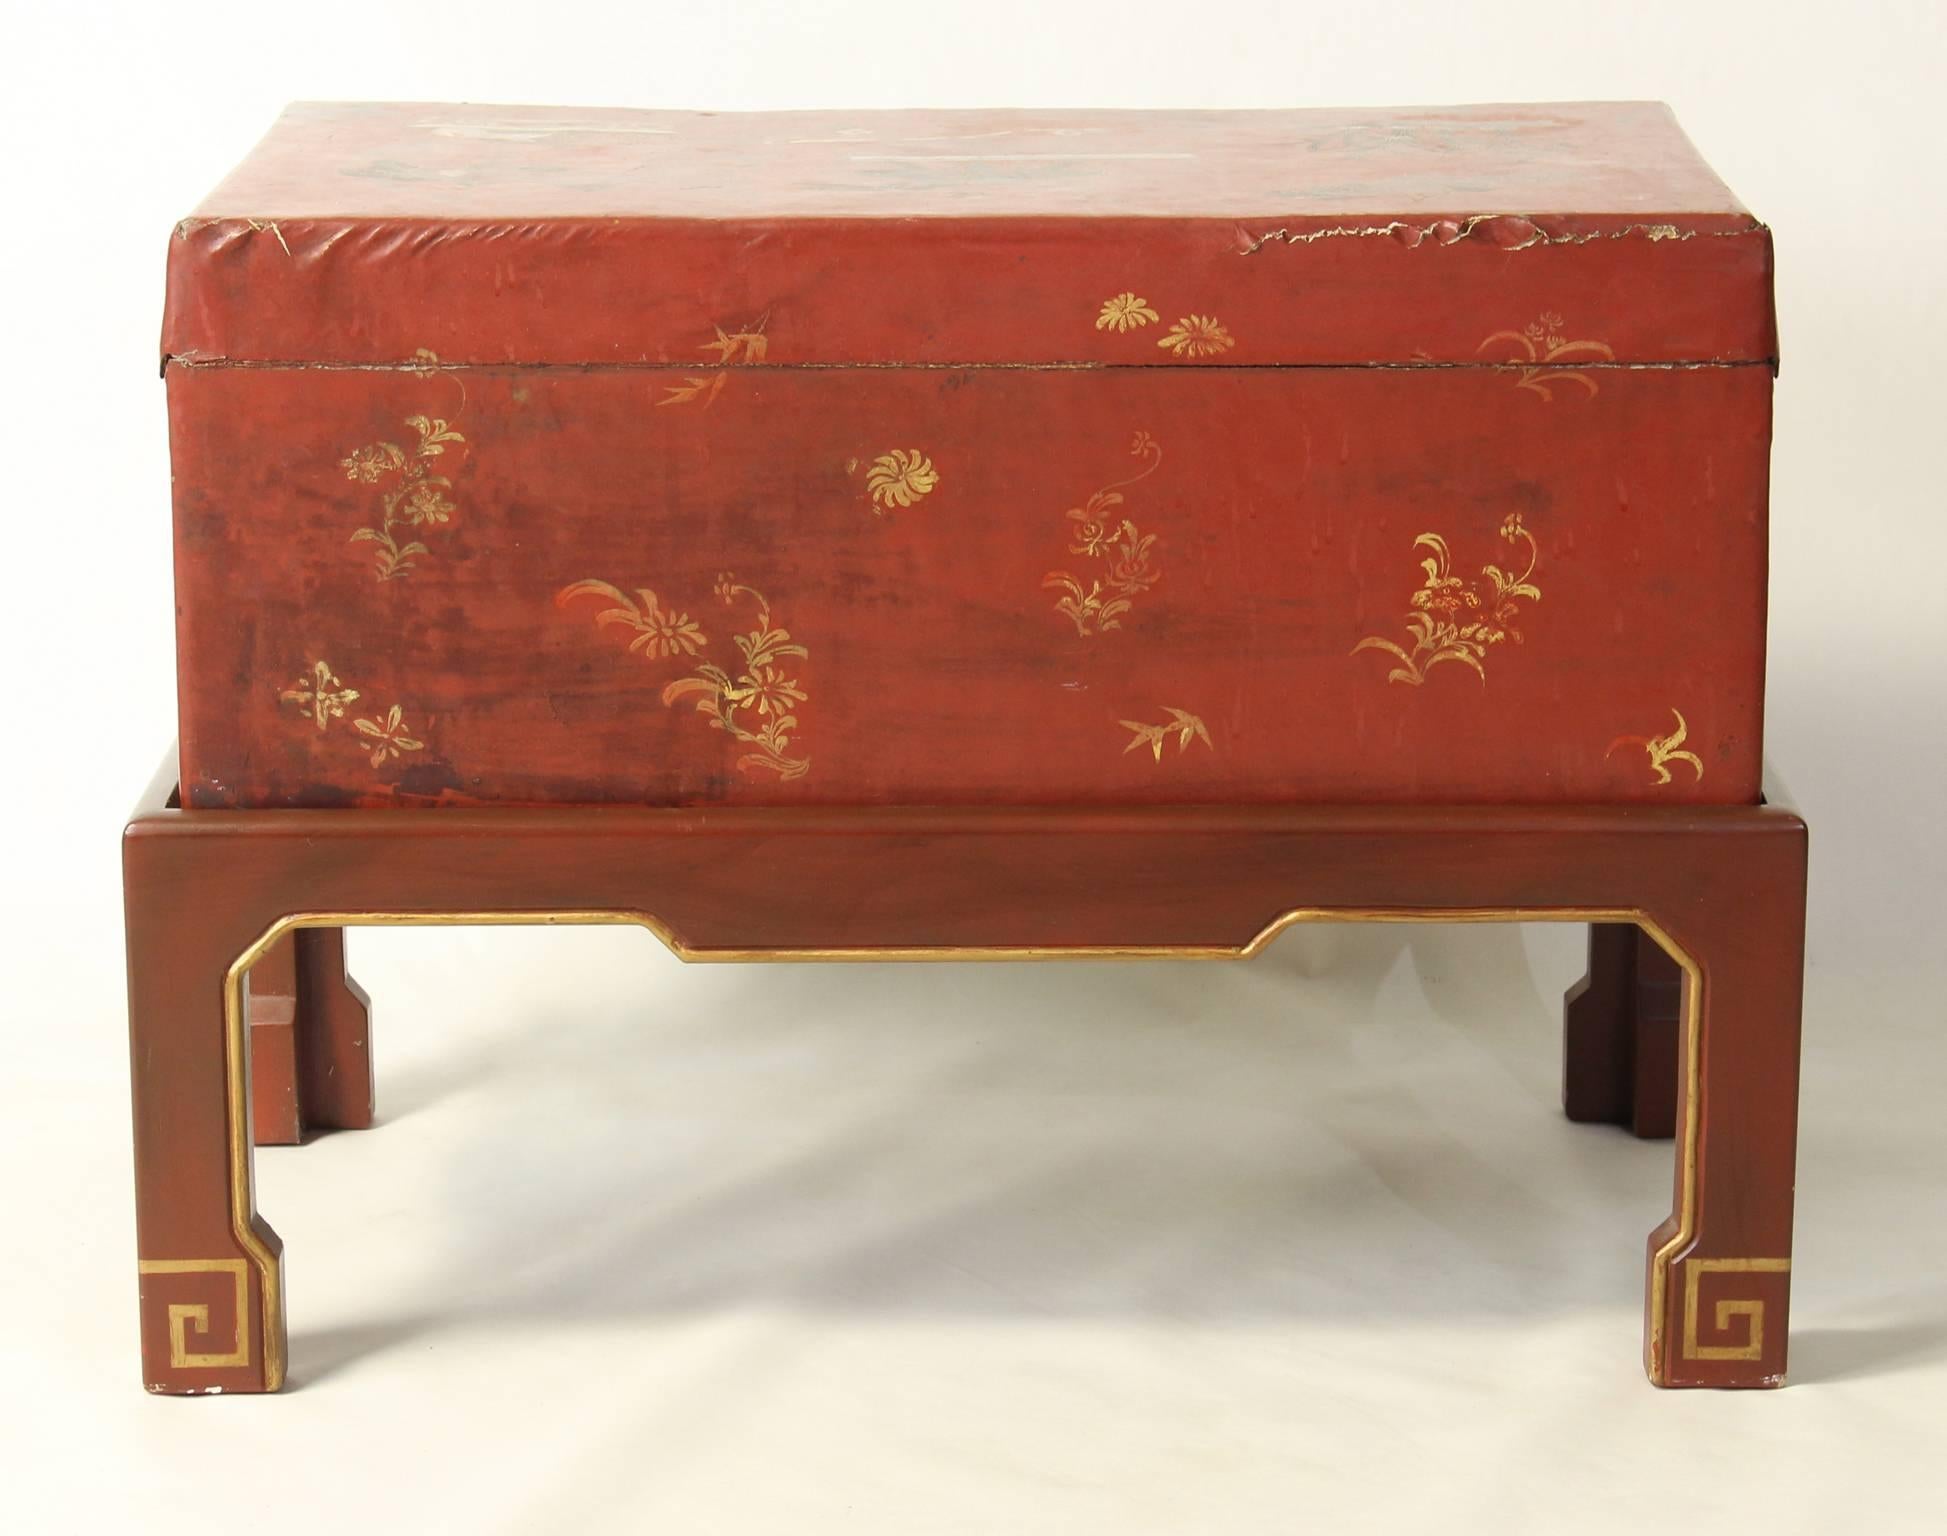 20th Century Hand-Painted Chinese Trunk on Stand